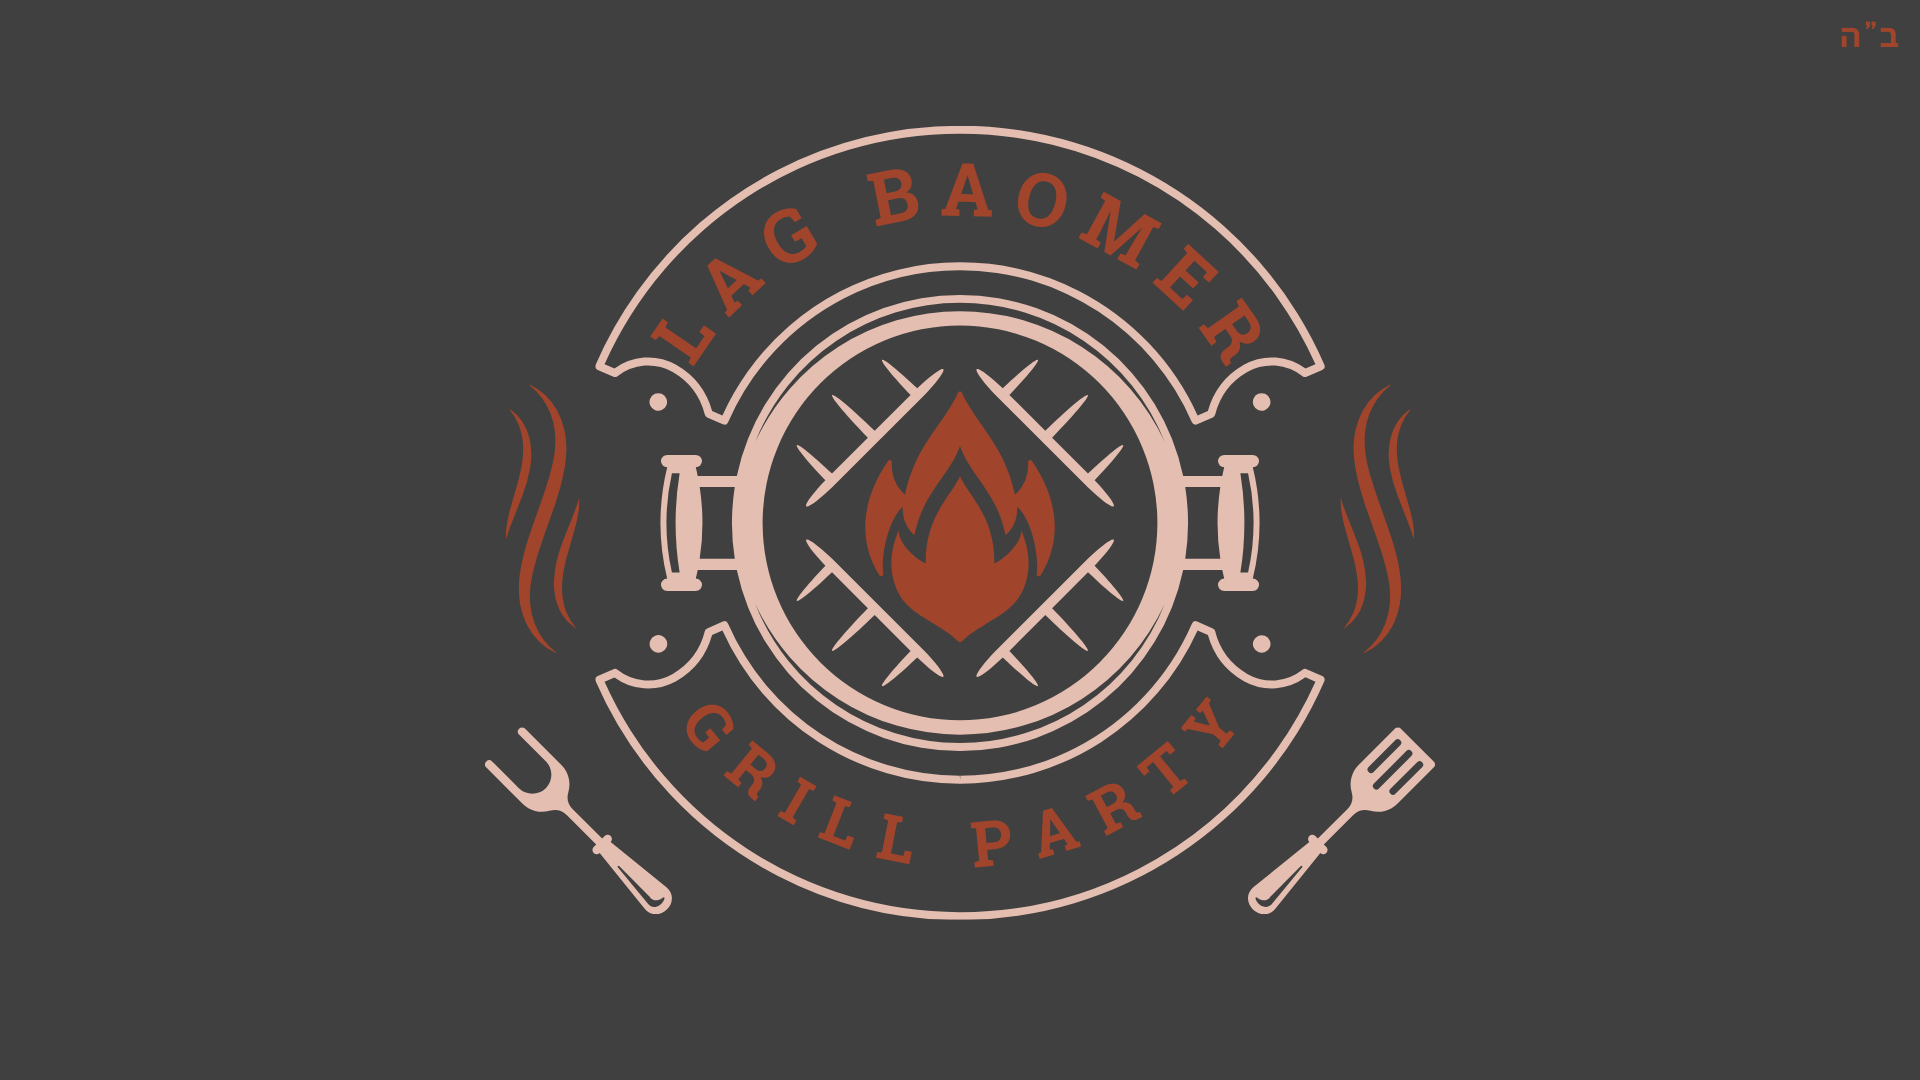  Join us for a    Lag B'omer BBQ!&nbsp;    Take part in this beautiful tradition celebrating&nbsp;Jewish unity, pride, &amp; the revelations of the esoteric soul of Torah.&nbsp;   Sunday, May 26th, 5:30 PM - 7:30 PM   REGISTER HERE  